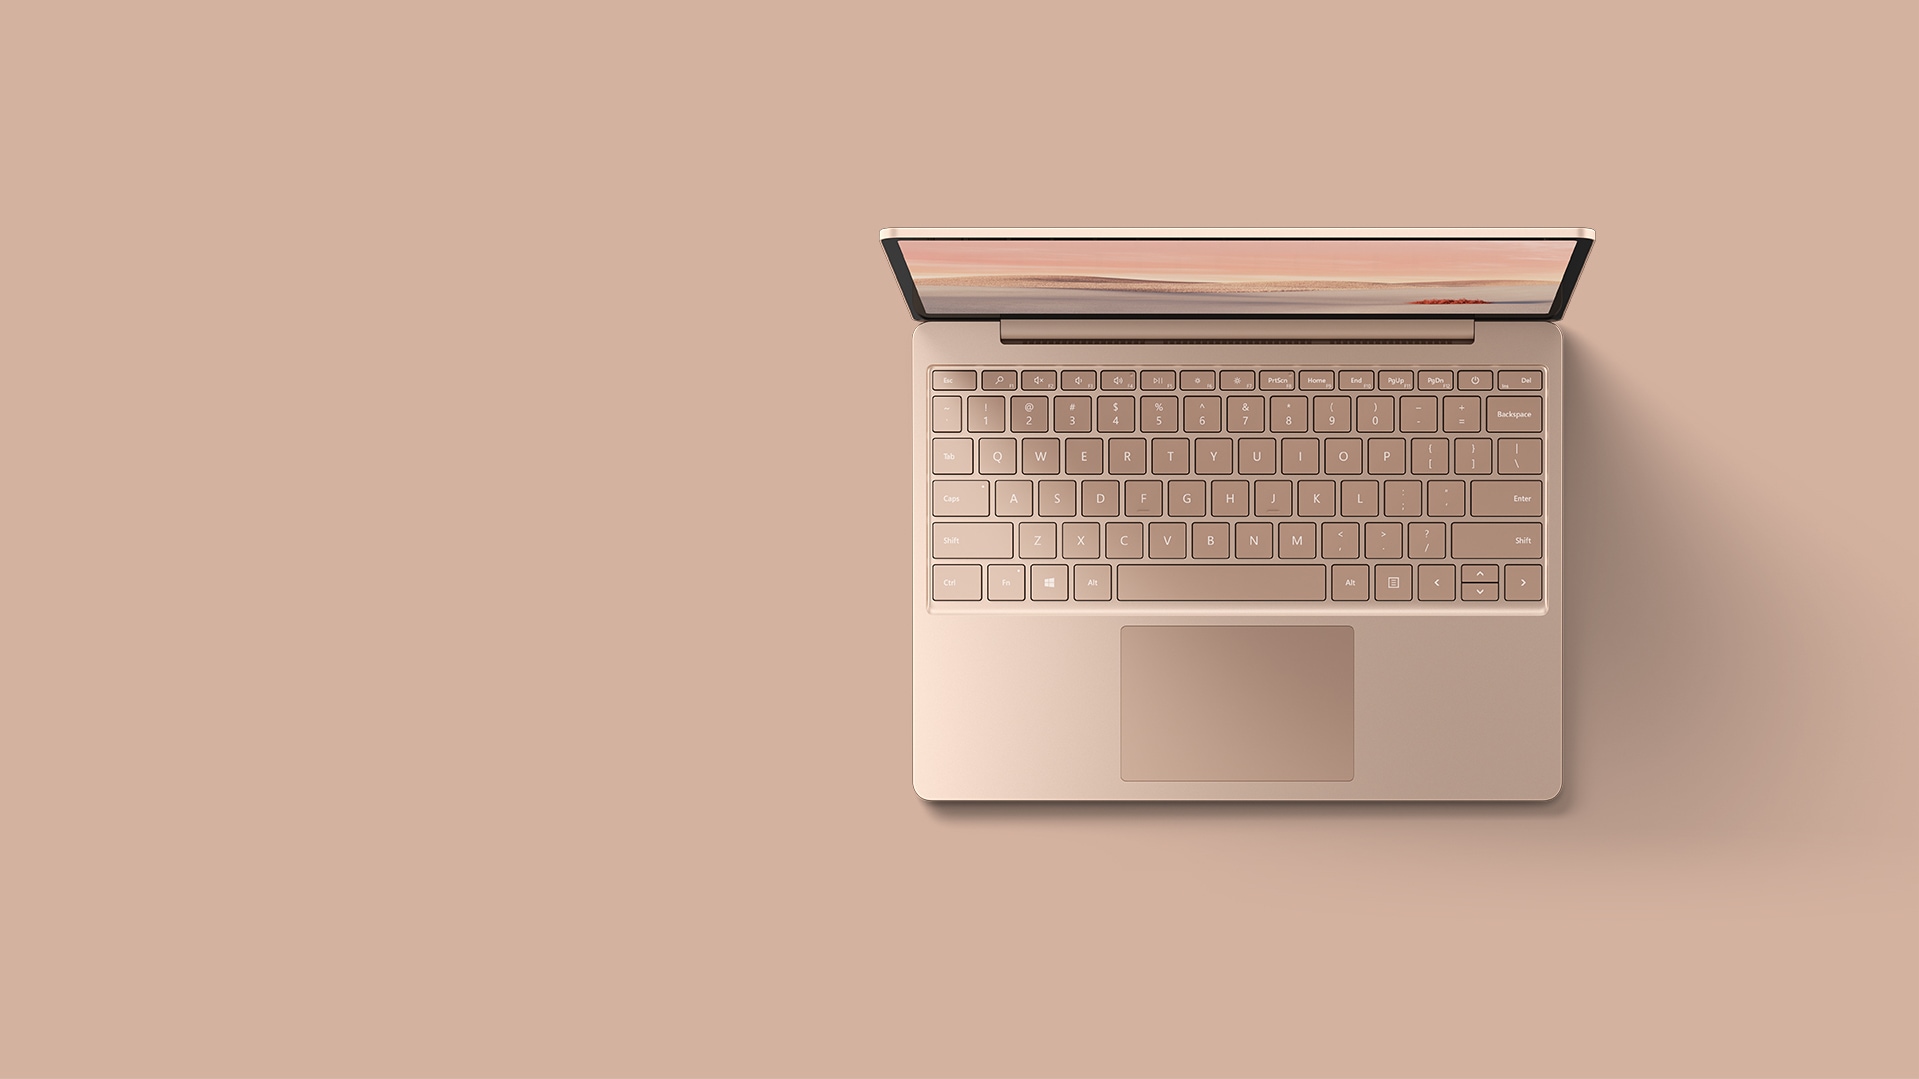 An aerial view of the sandstone Surface Laptop Go resting upon a matching background.